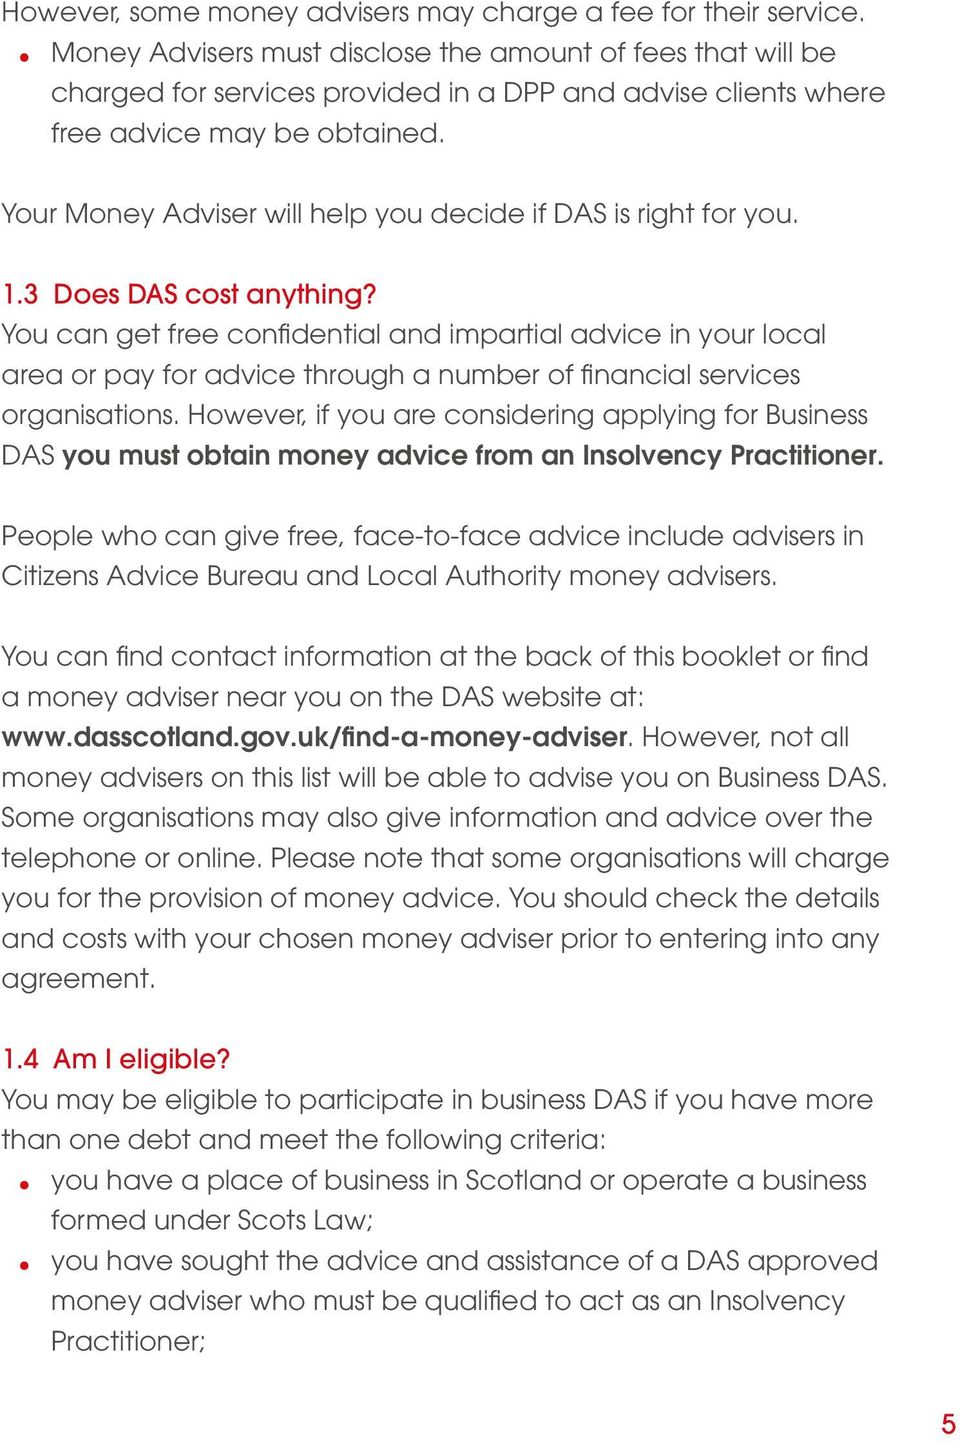 Your Money Adviser will help you decide if DAS is right for you. 1.3 Does DAS cost anything?